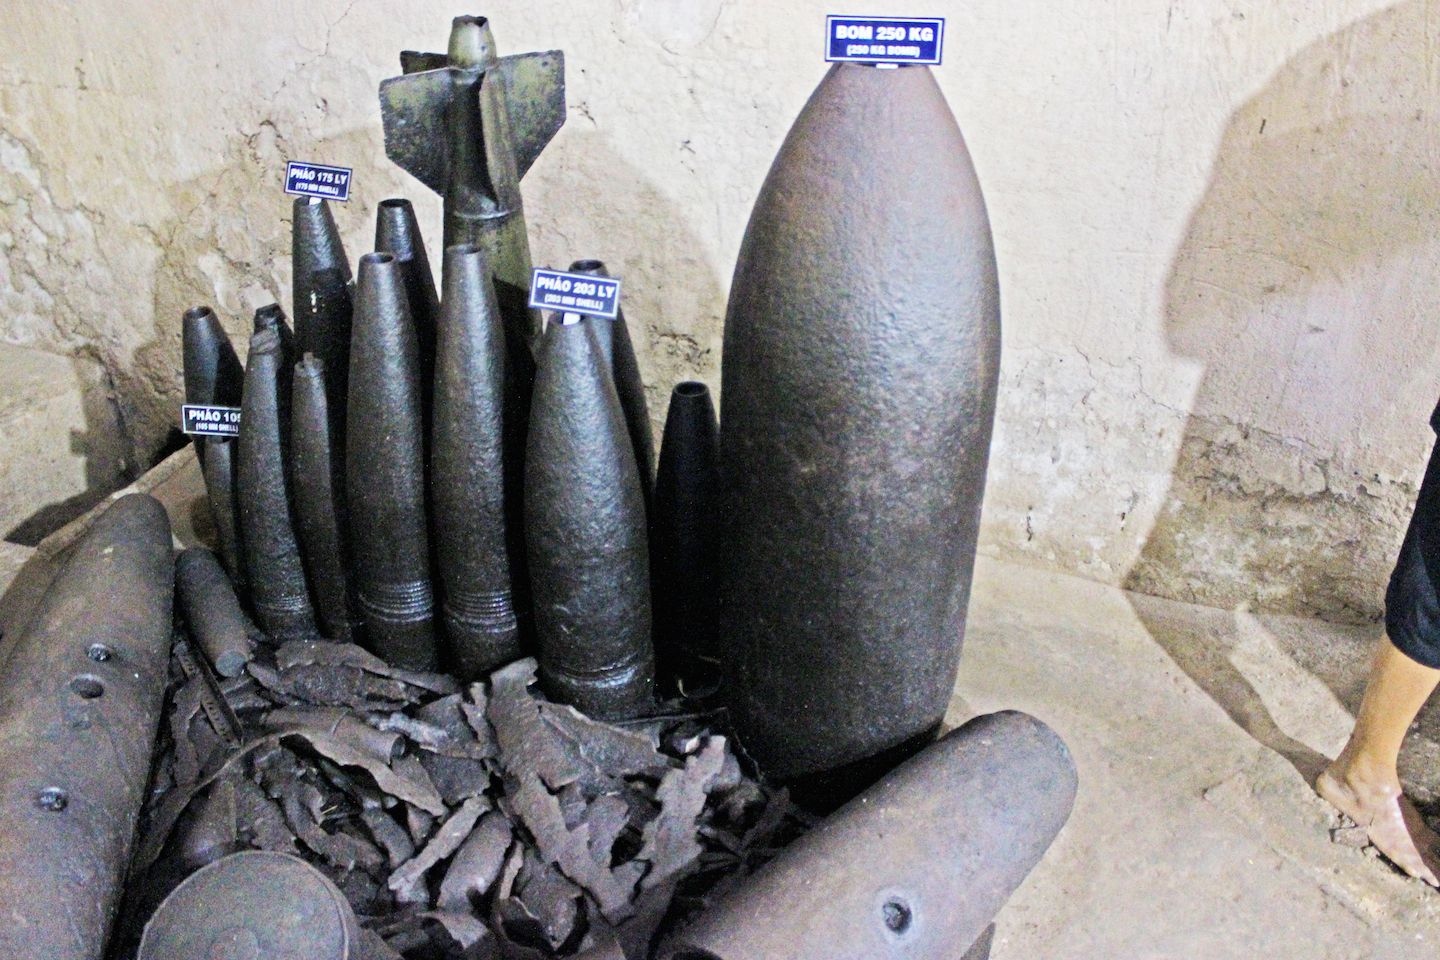 Several captured bombs that would be transformed into smaller bombs